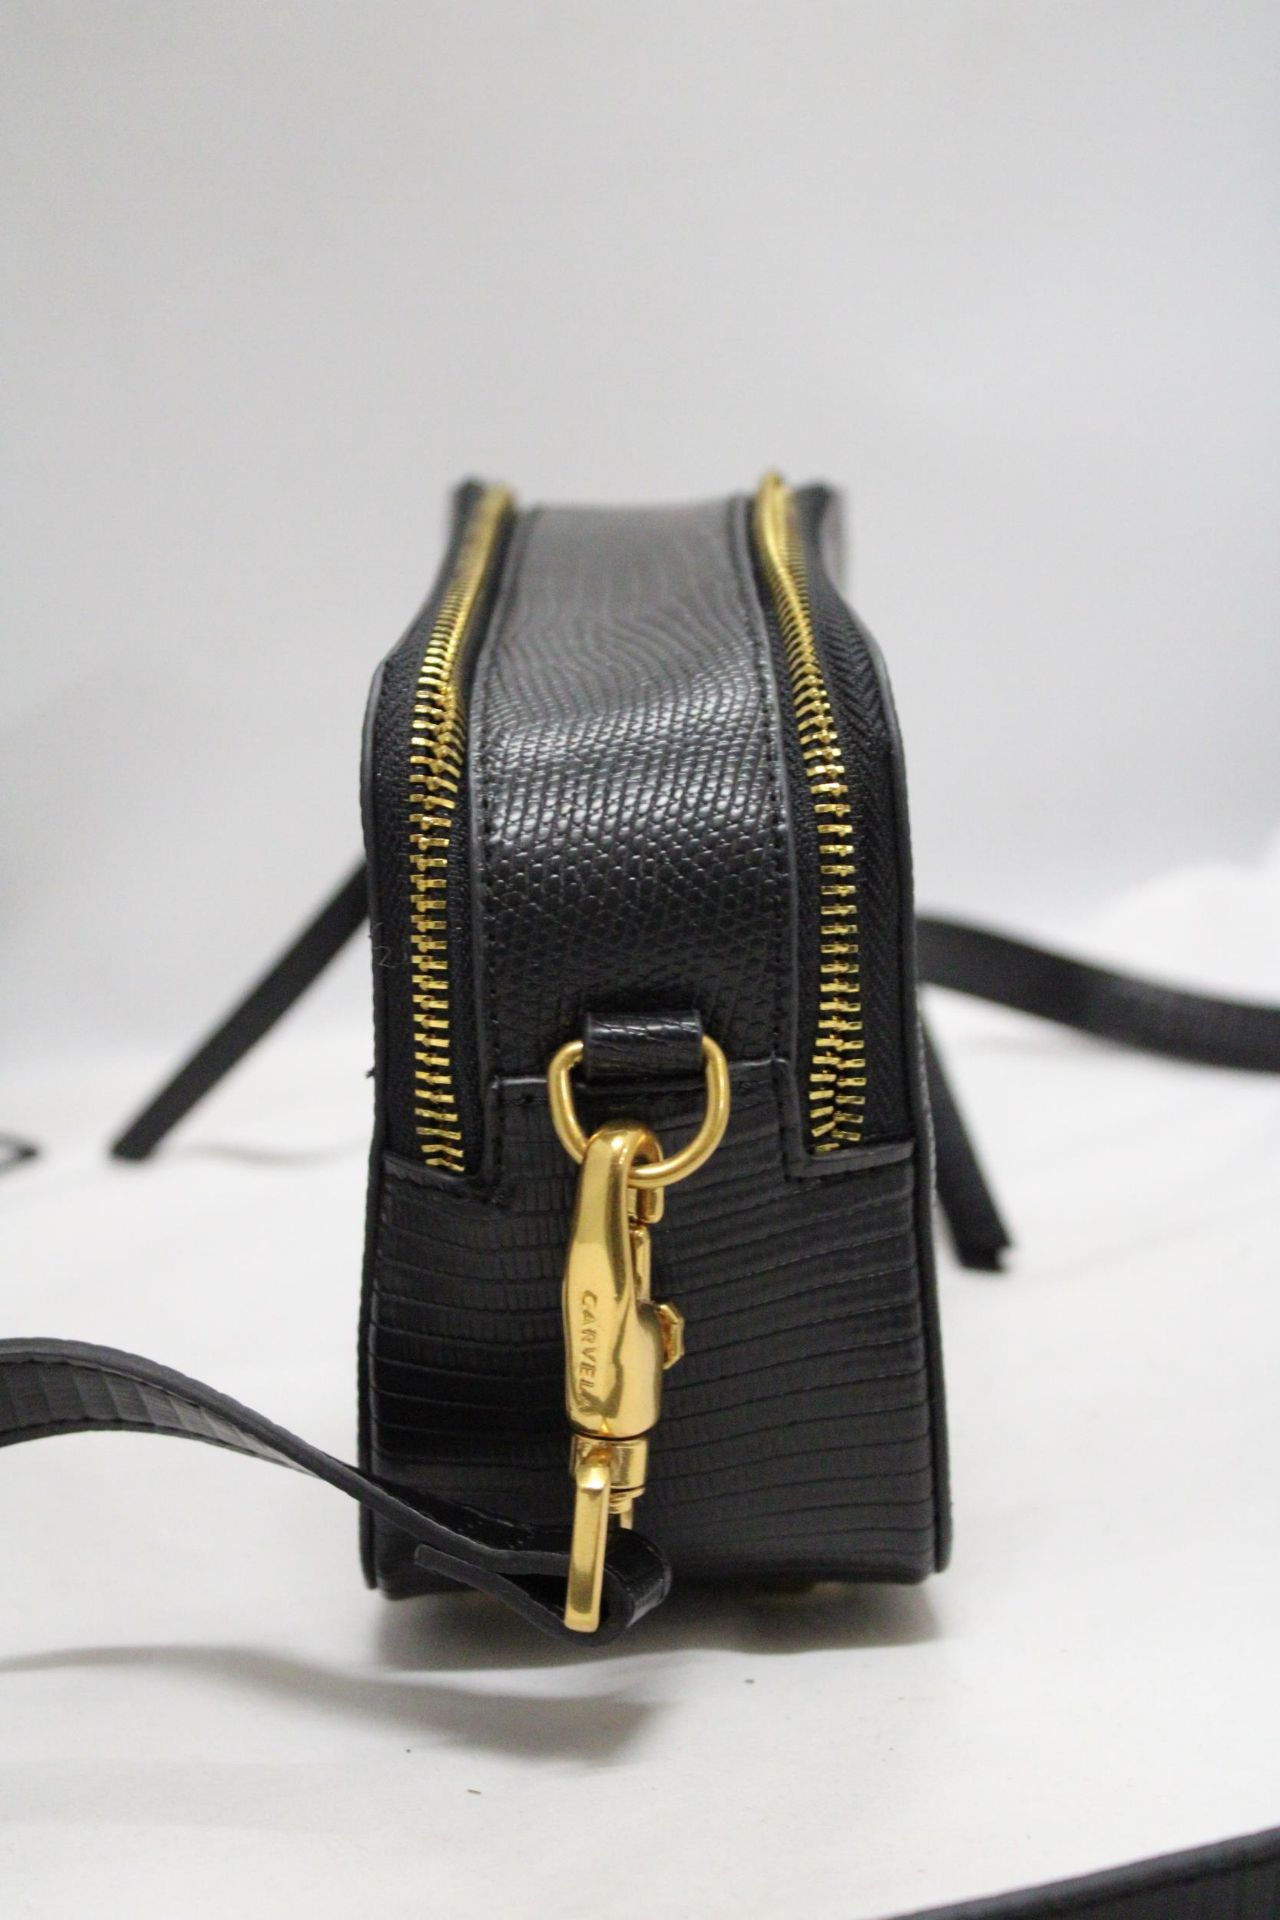 A CARVALA HANDBAG WITH DETACHABLE STRAPS AND DUST BAG - Image 3 of 6